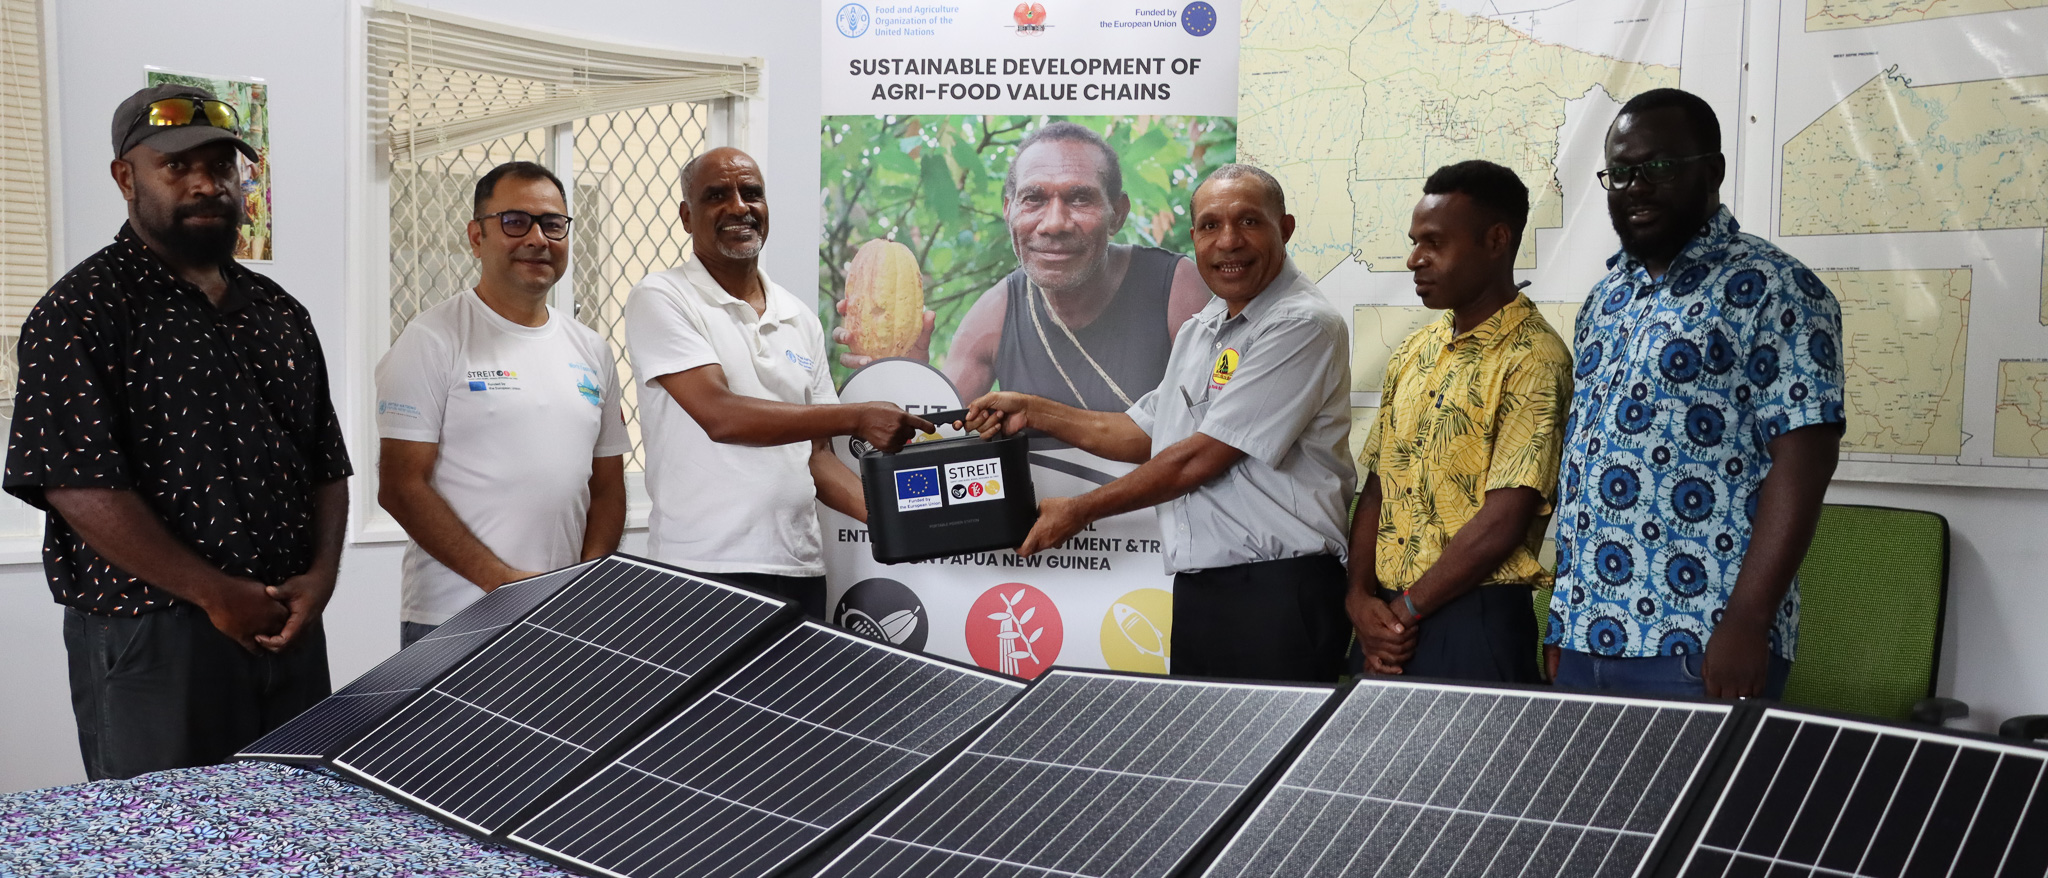 FAO officials or the EU-STREIT PNG Programme, handing over the first Portable Solar Power Generator to the representative of the Women's Micro Bank - Mama Bank in the Sepik region.